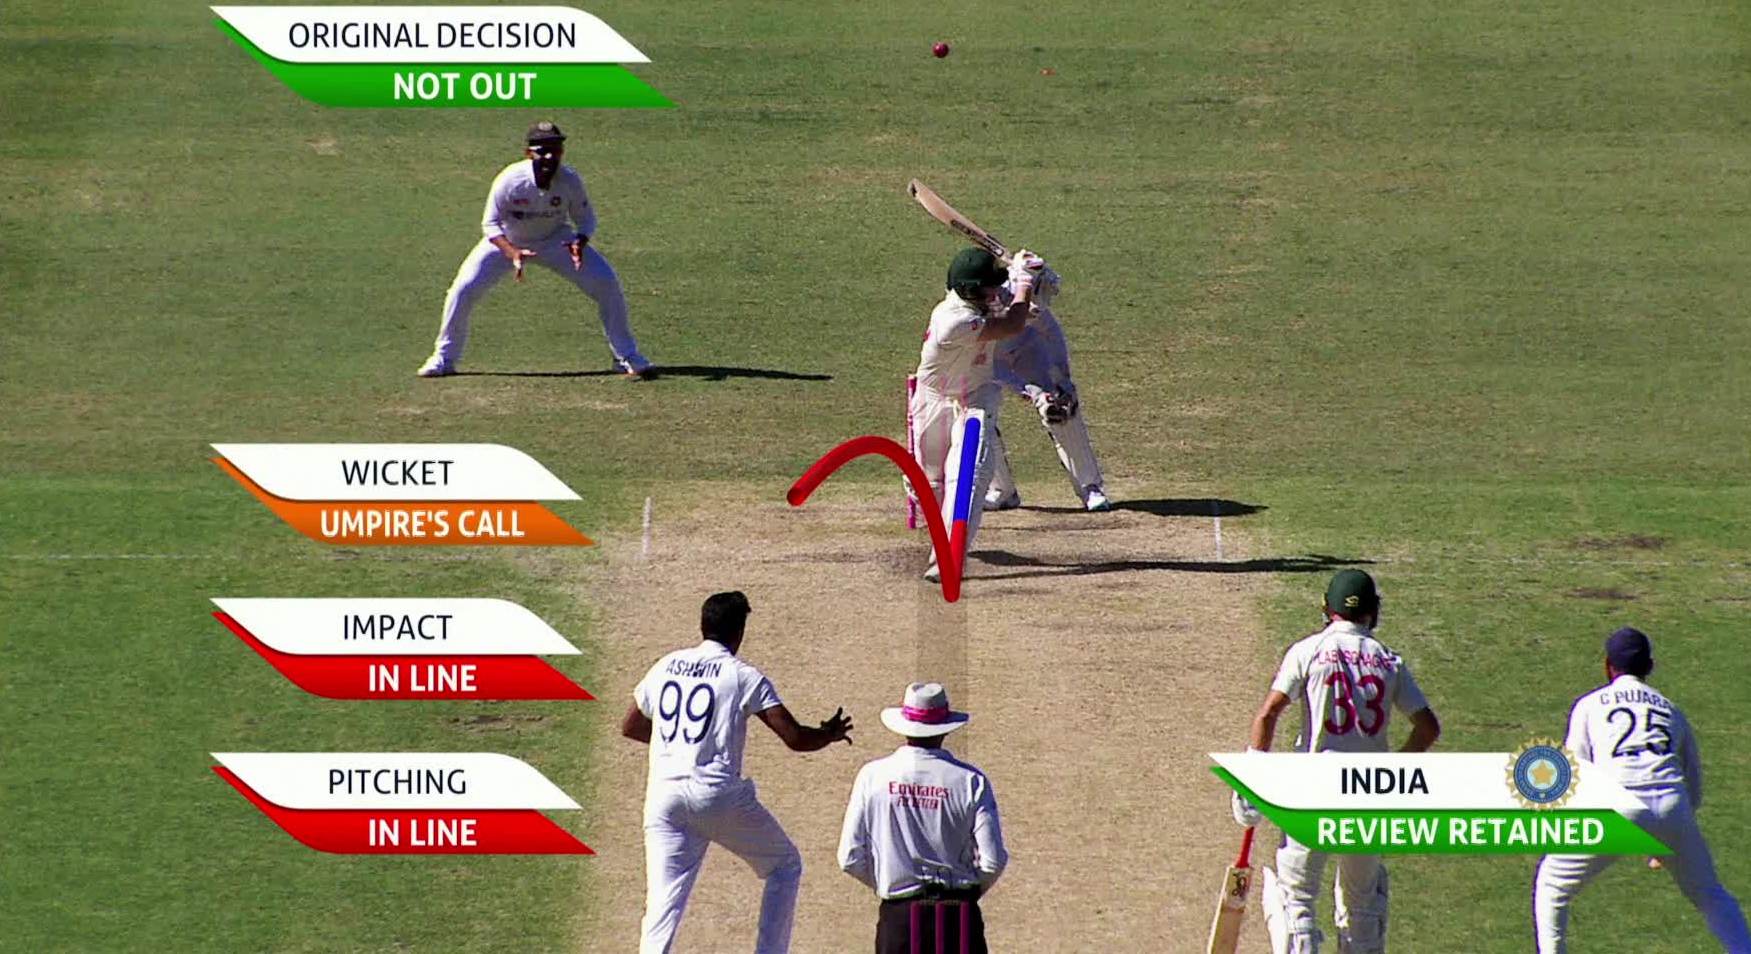 Replay showed four stumps after India opted for DRS | Twitter